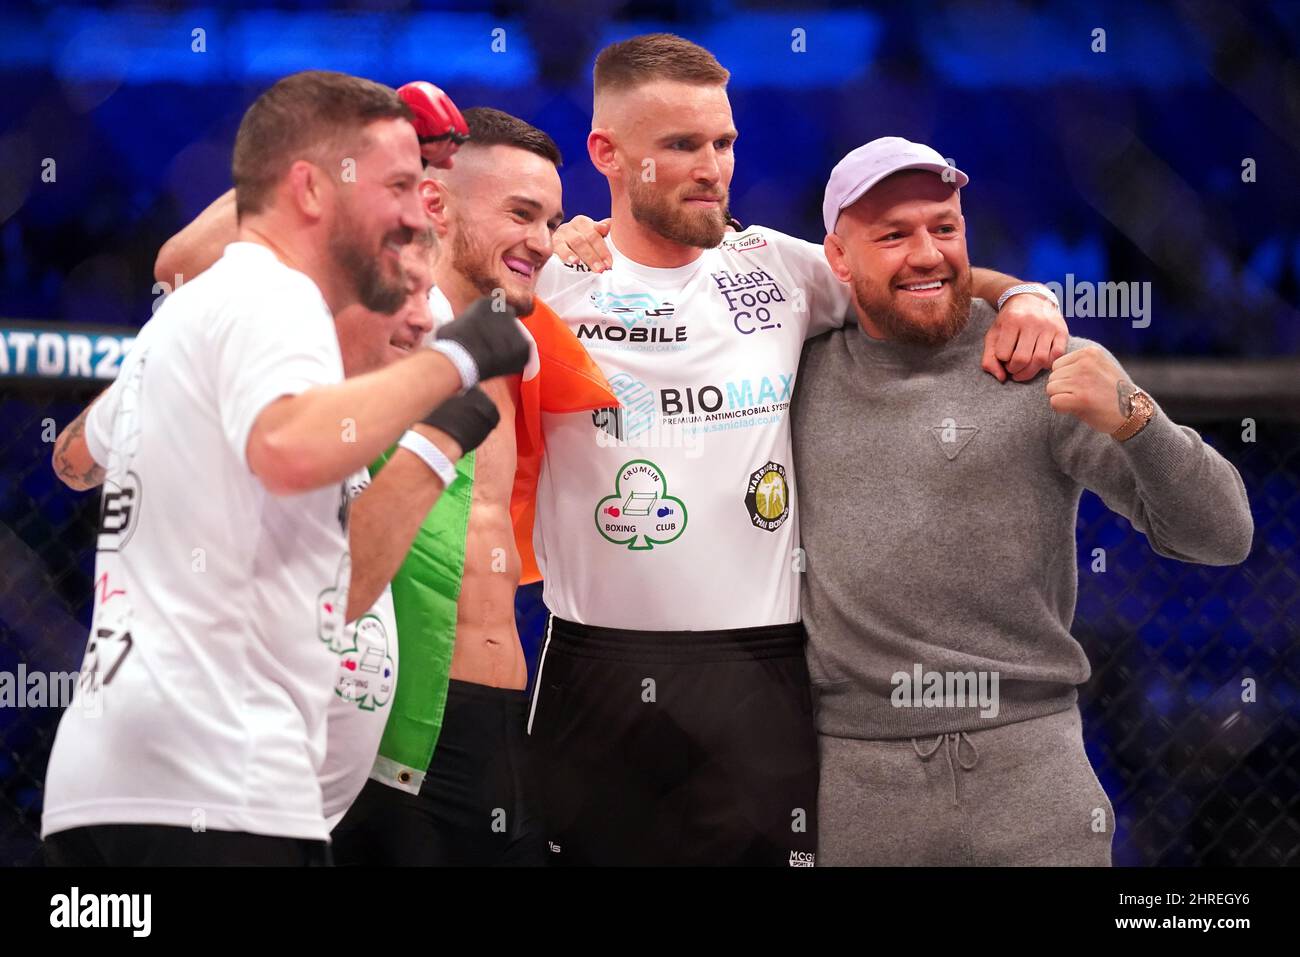 UFC fighter Conor McGregor (right) poses for a photo with SBG team mate Lee  Hammond (centre) and coaches John Kavangh (left), Phil Sutcliffe Jr (second  left) and Cian Cowley right after the